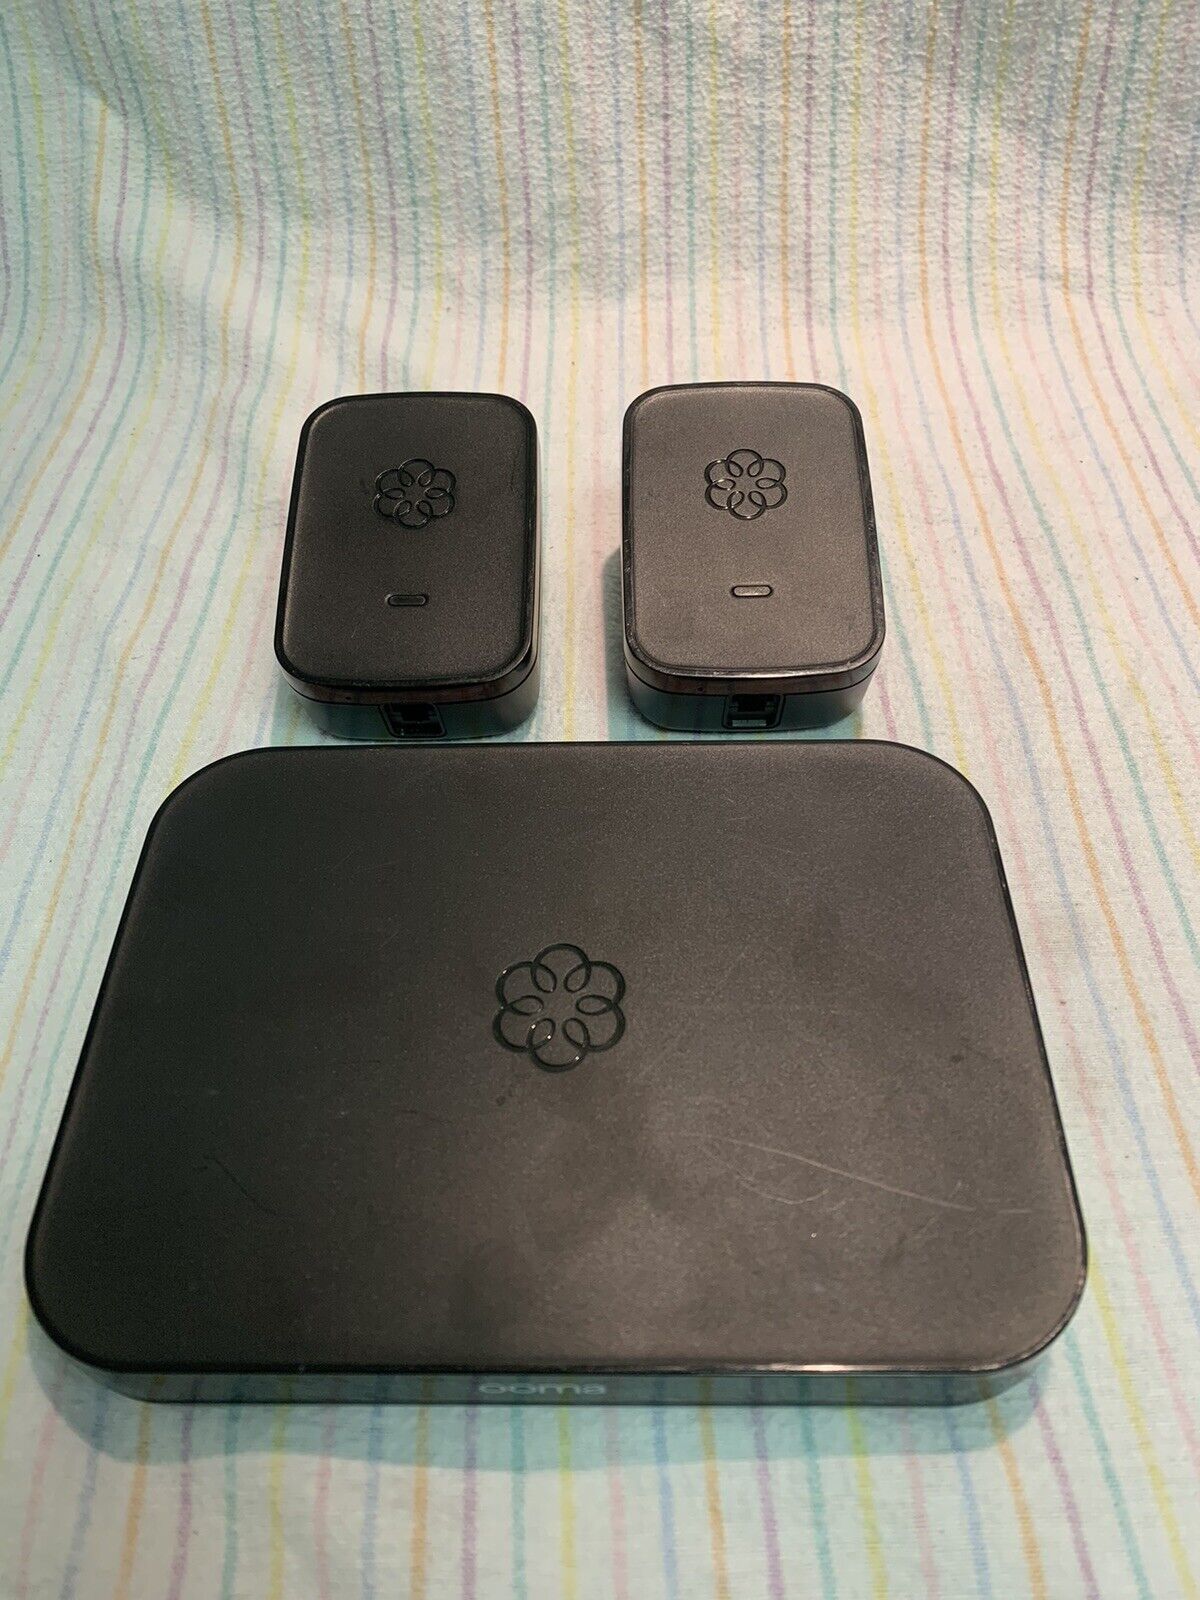 Ooma Office VoIP System (Base Station & Linx)